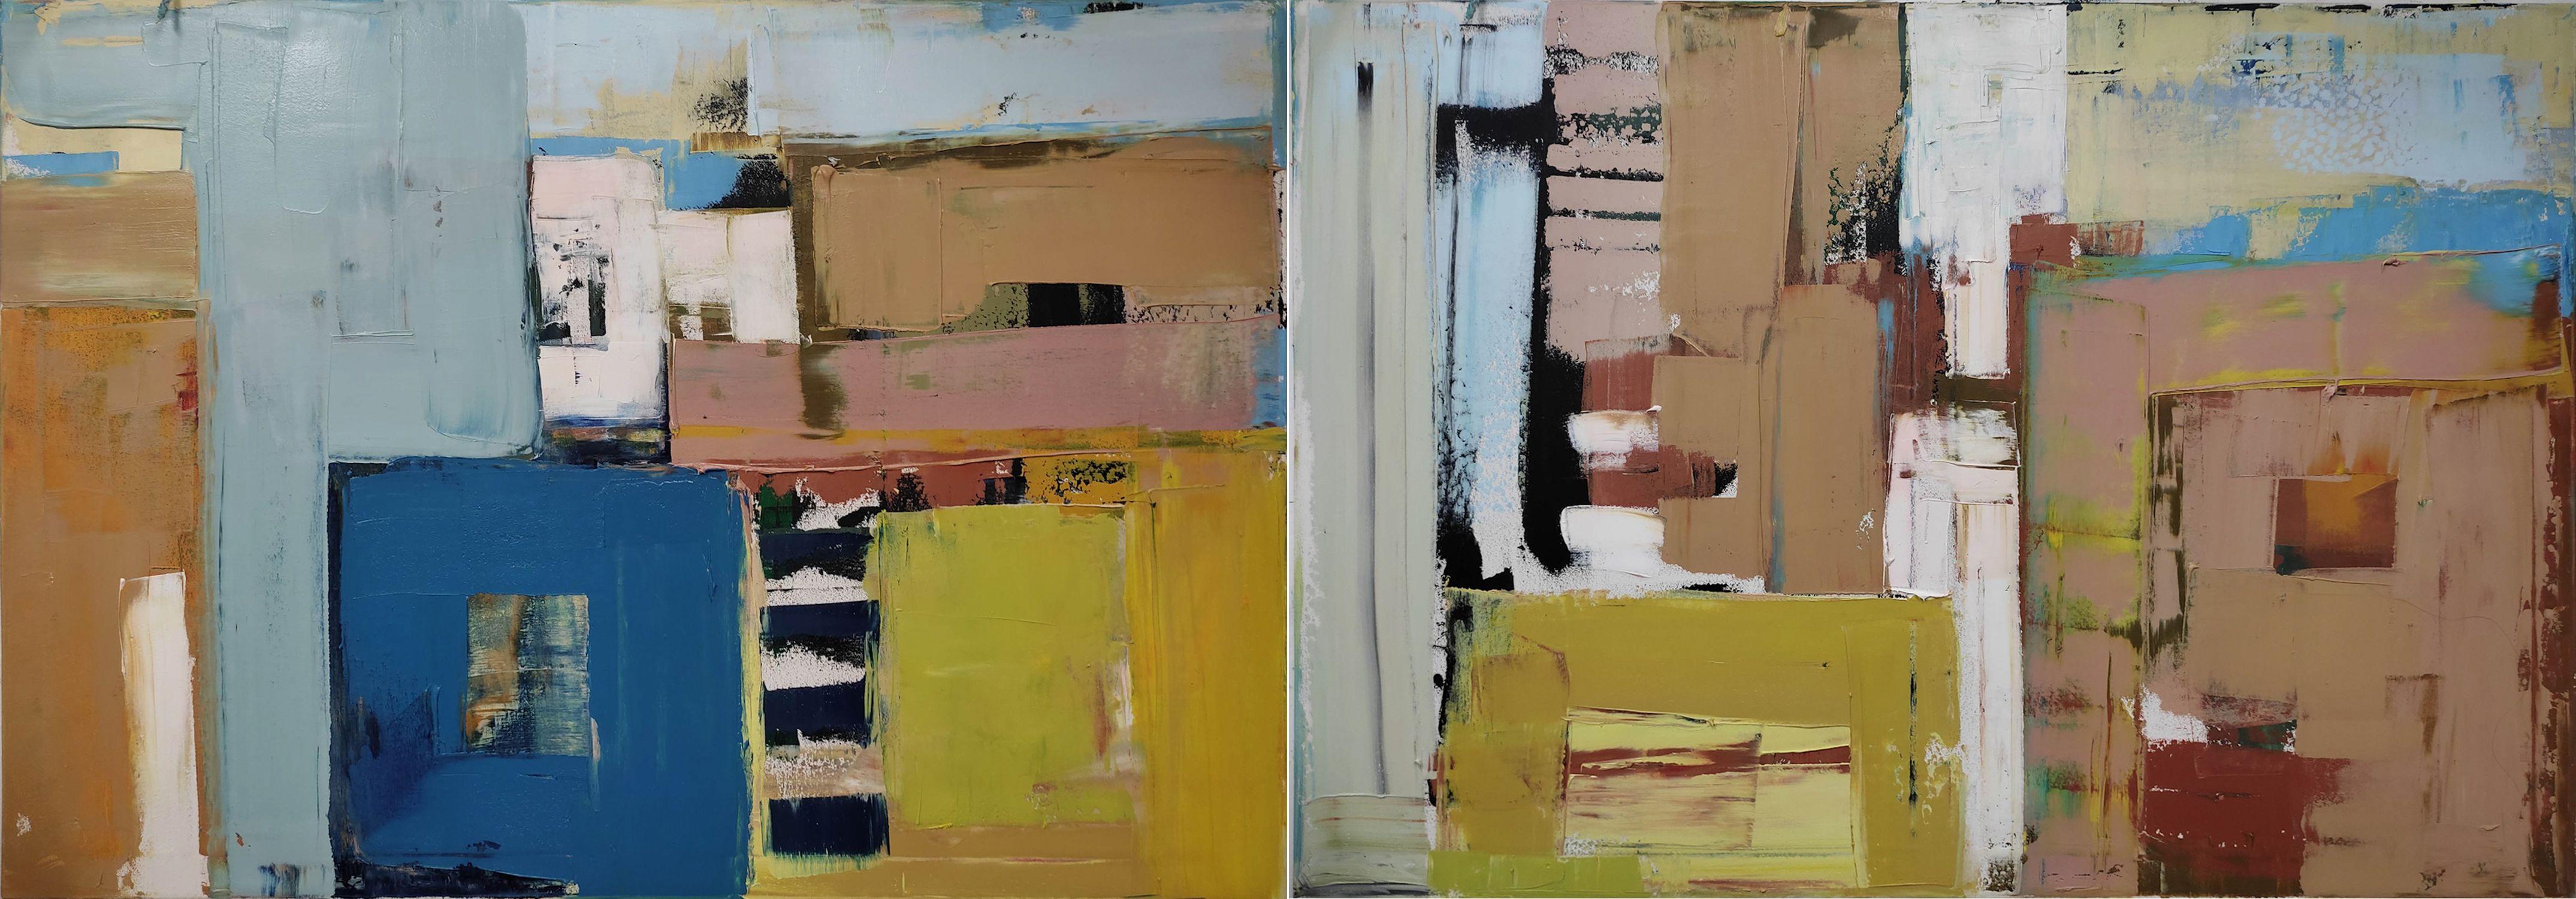 Karina Antonczak Abstract Painting - oil painting, stretched, diptych "Layer city 48", Painting, Oil on Canvas